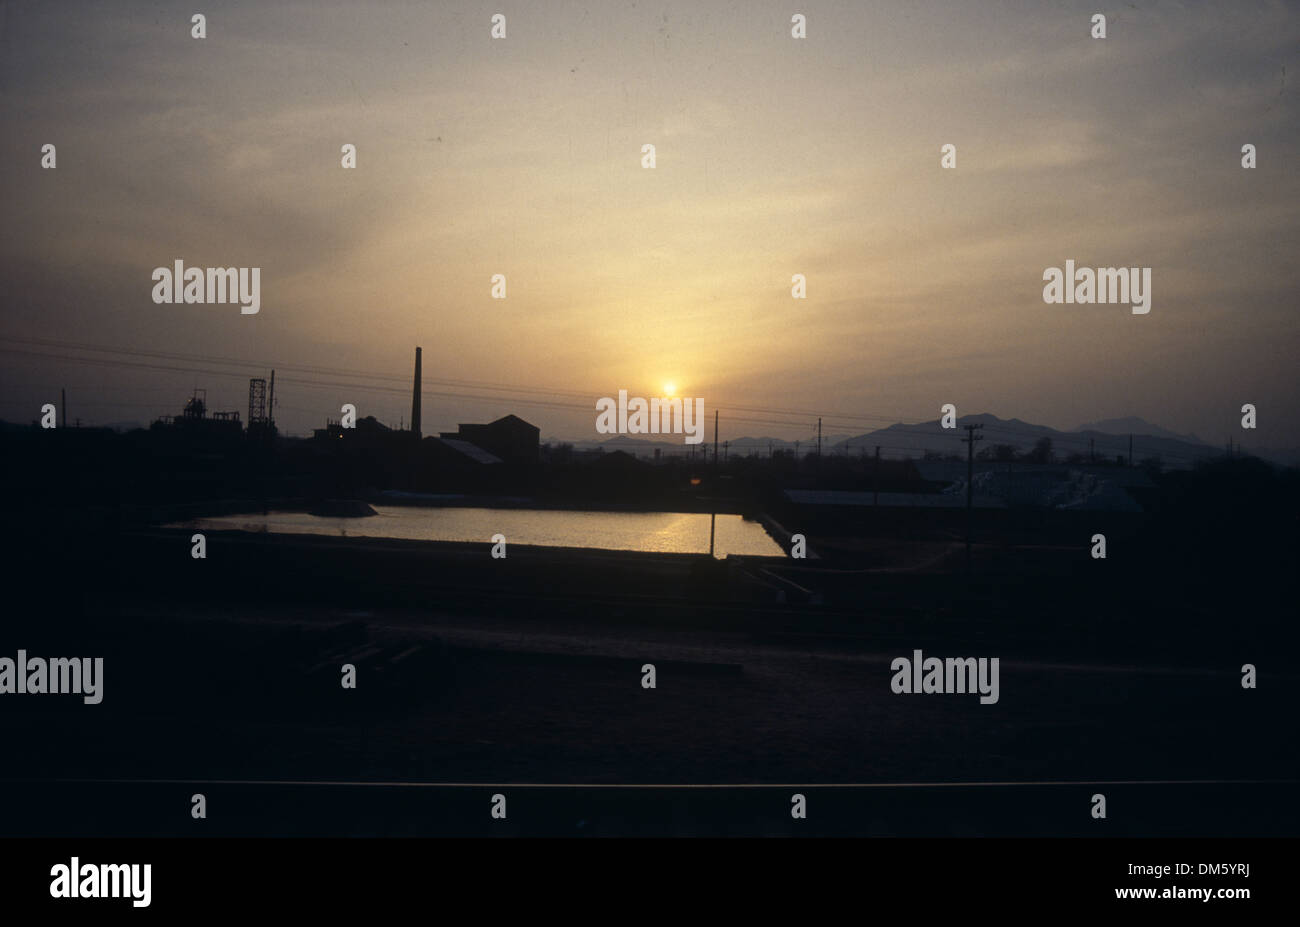 Sunset scenery with a small pond near a farmland in China Stock Photo